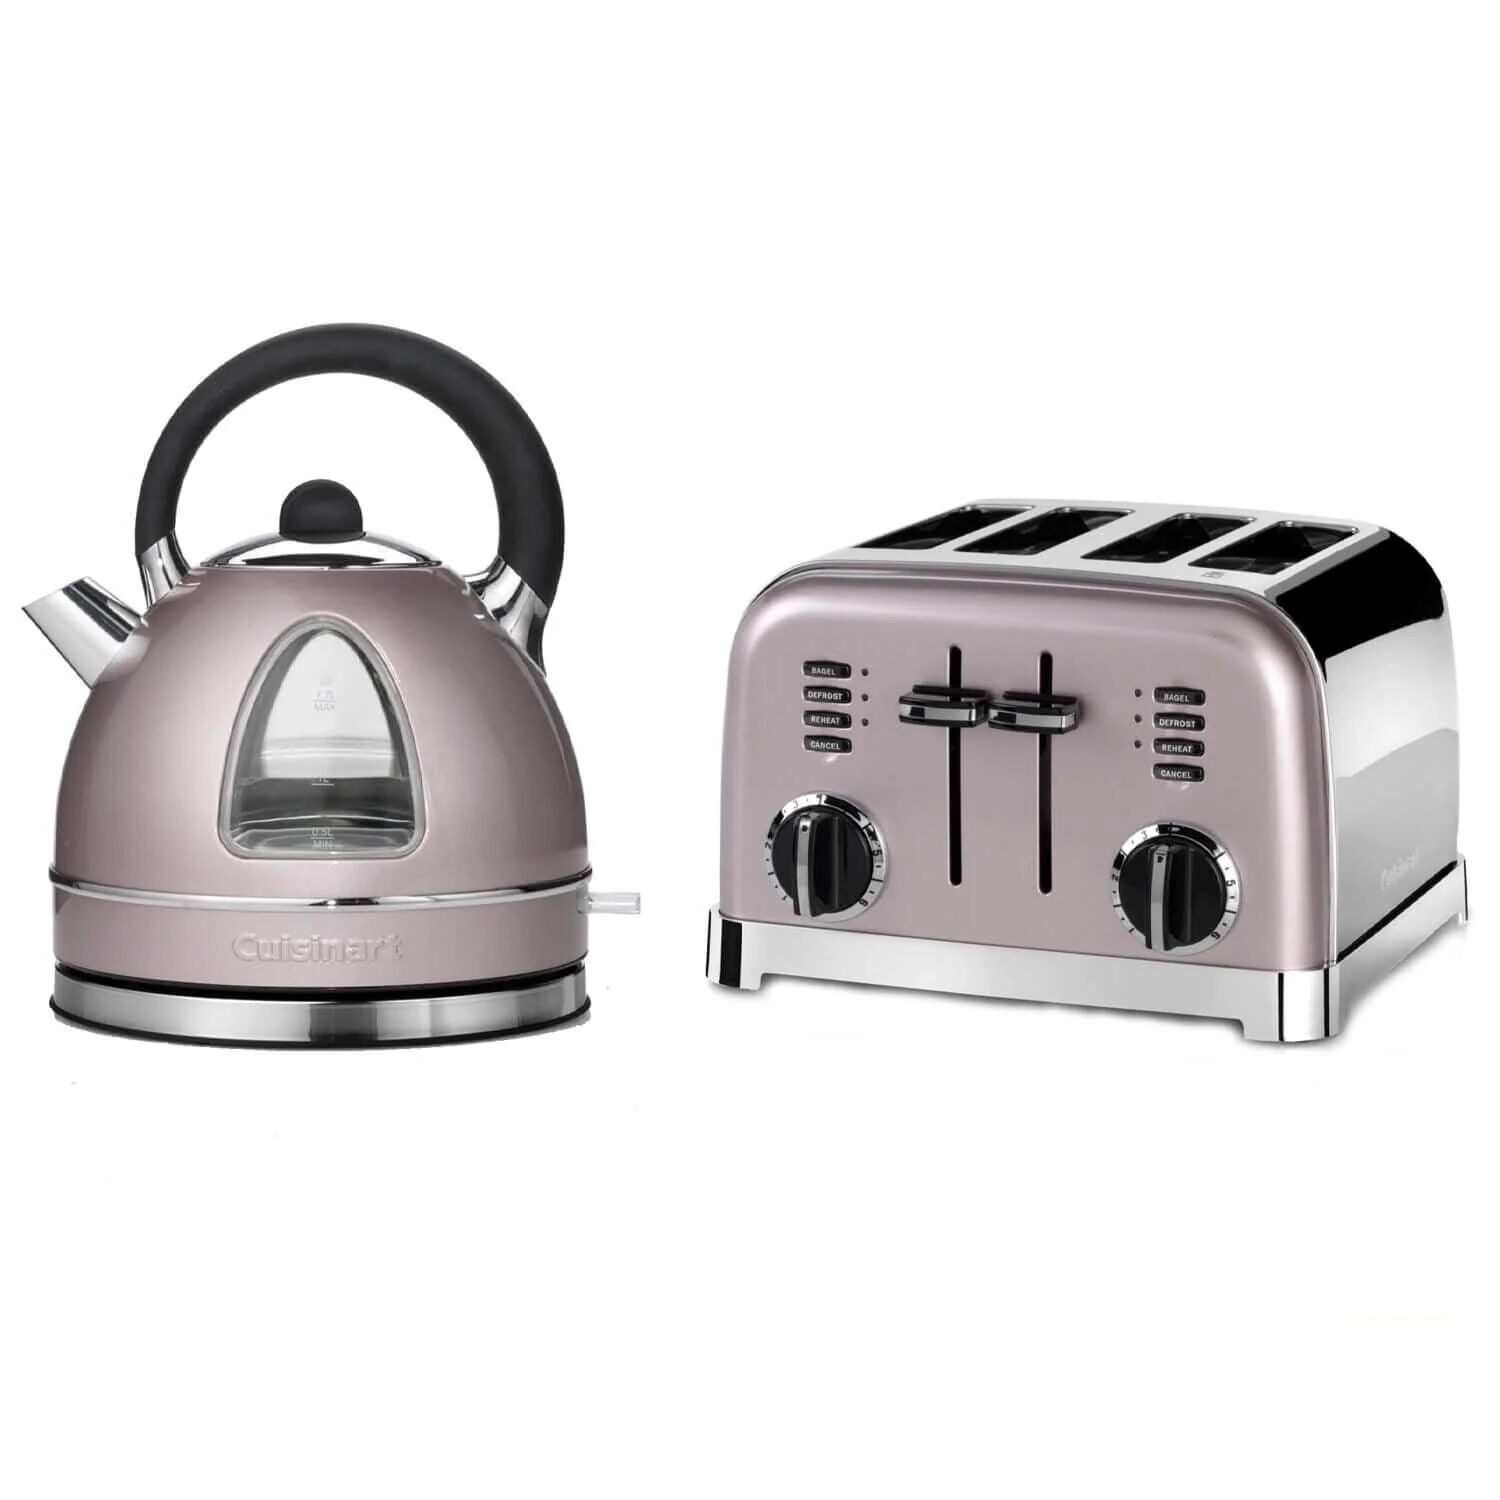 Cuisinart Style Collection Traditional Dome Kettle & 4 Slice Toaster Set - Vintage Rose